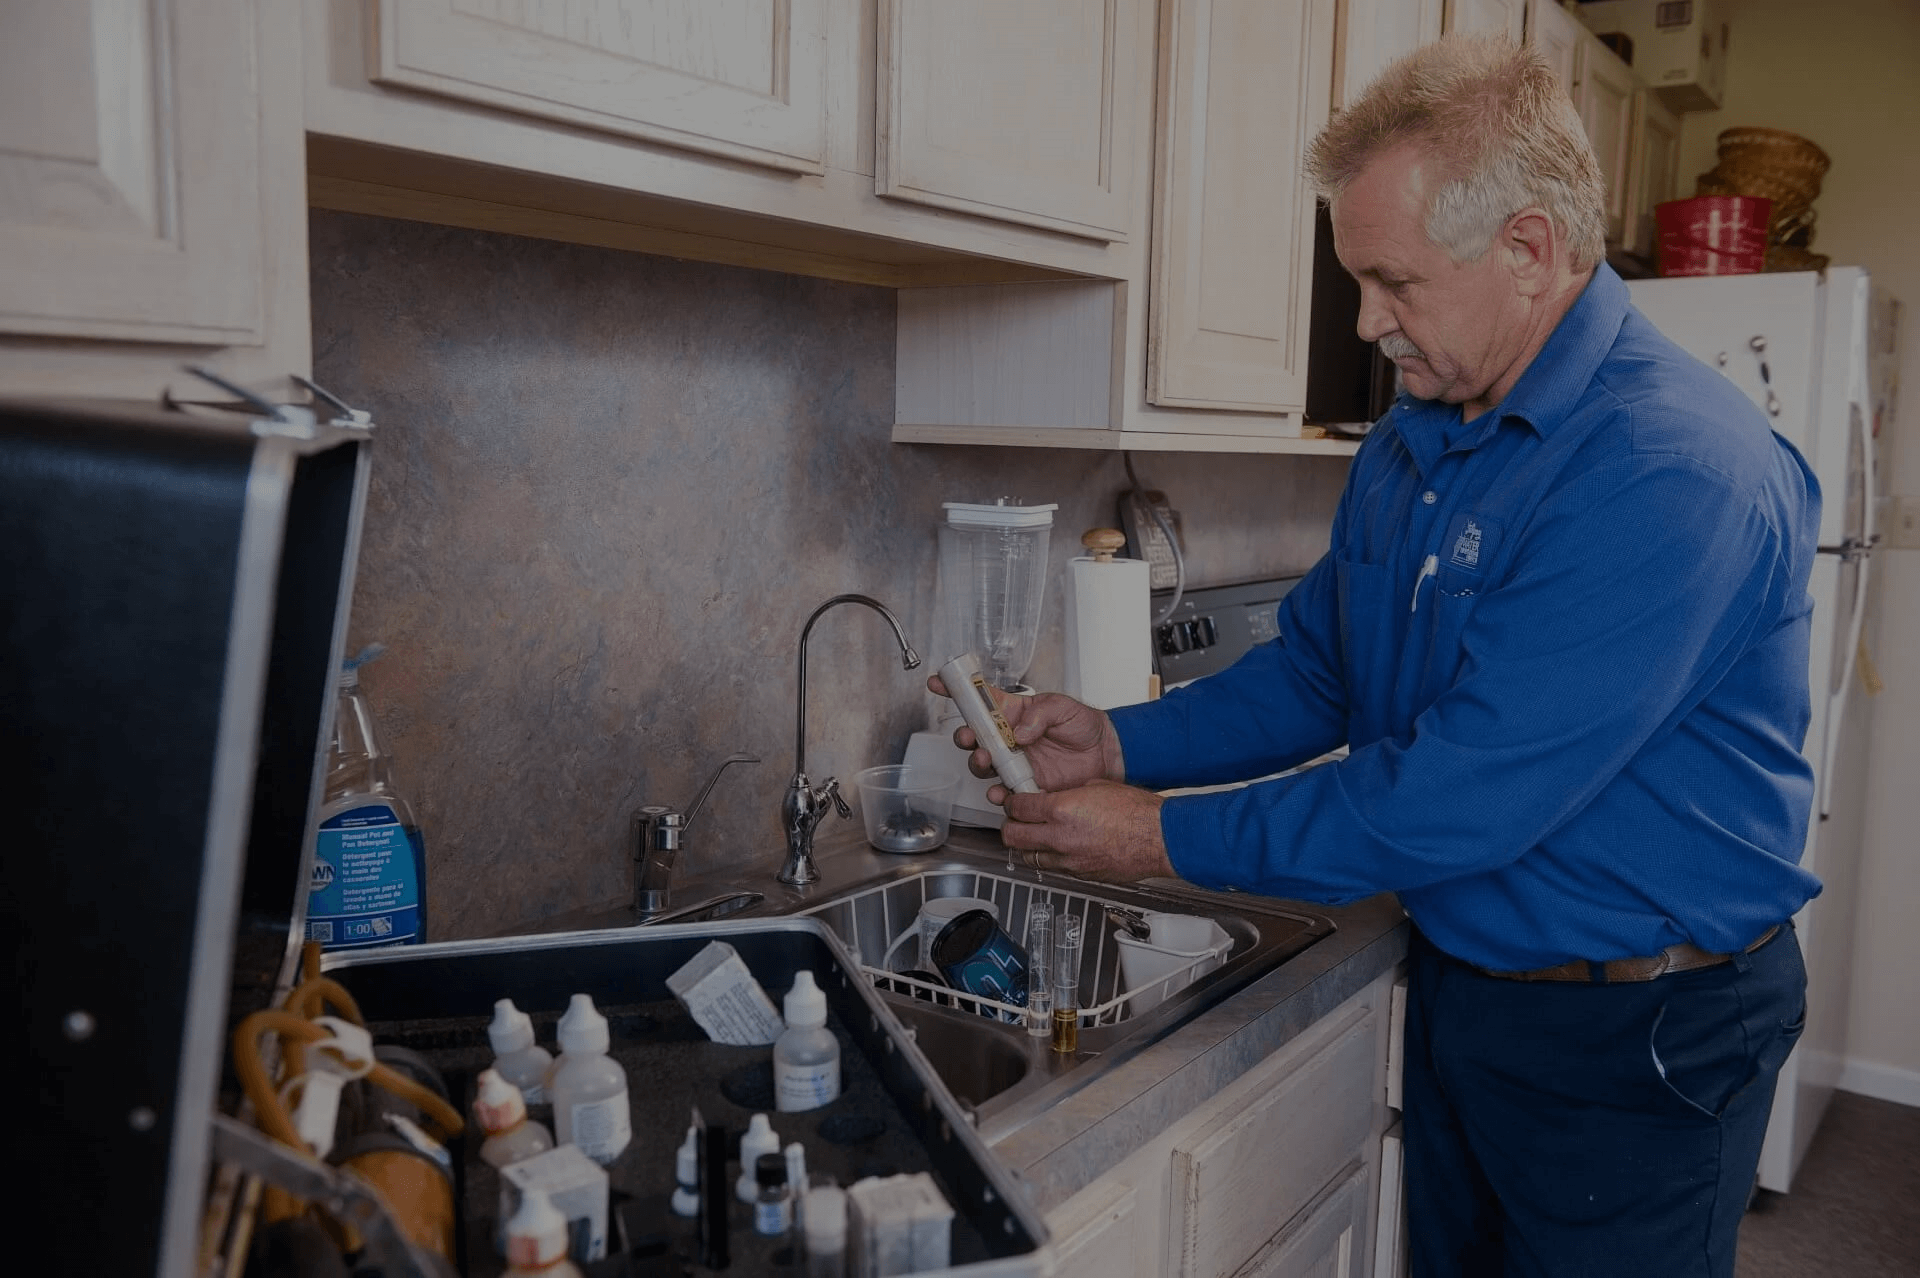 A professional in water softener service in Cape May County, NJ